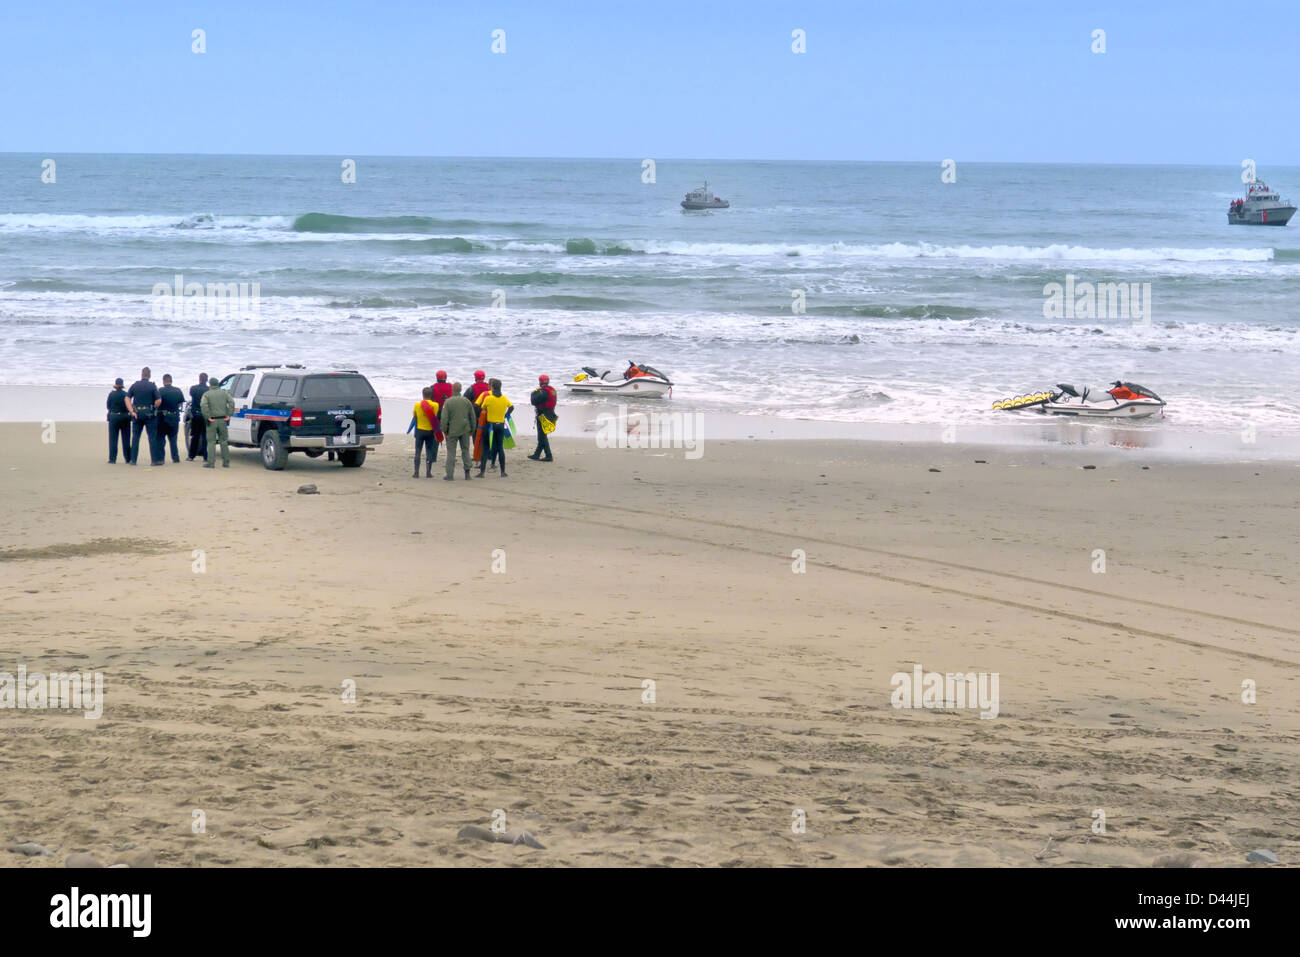 A search and rescue team of first responders assessing an unfolding ocean rescue situation.. Stock Photo